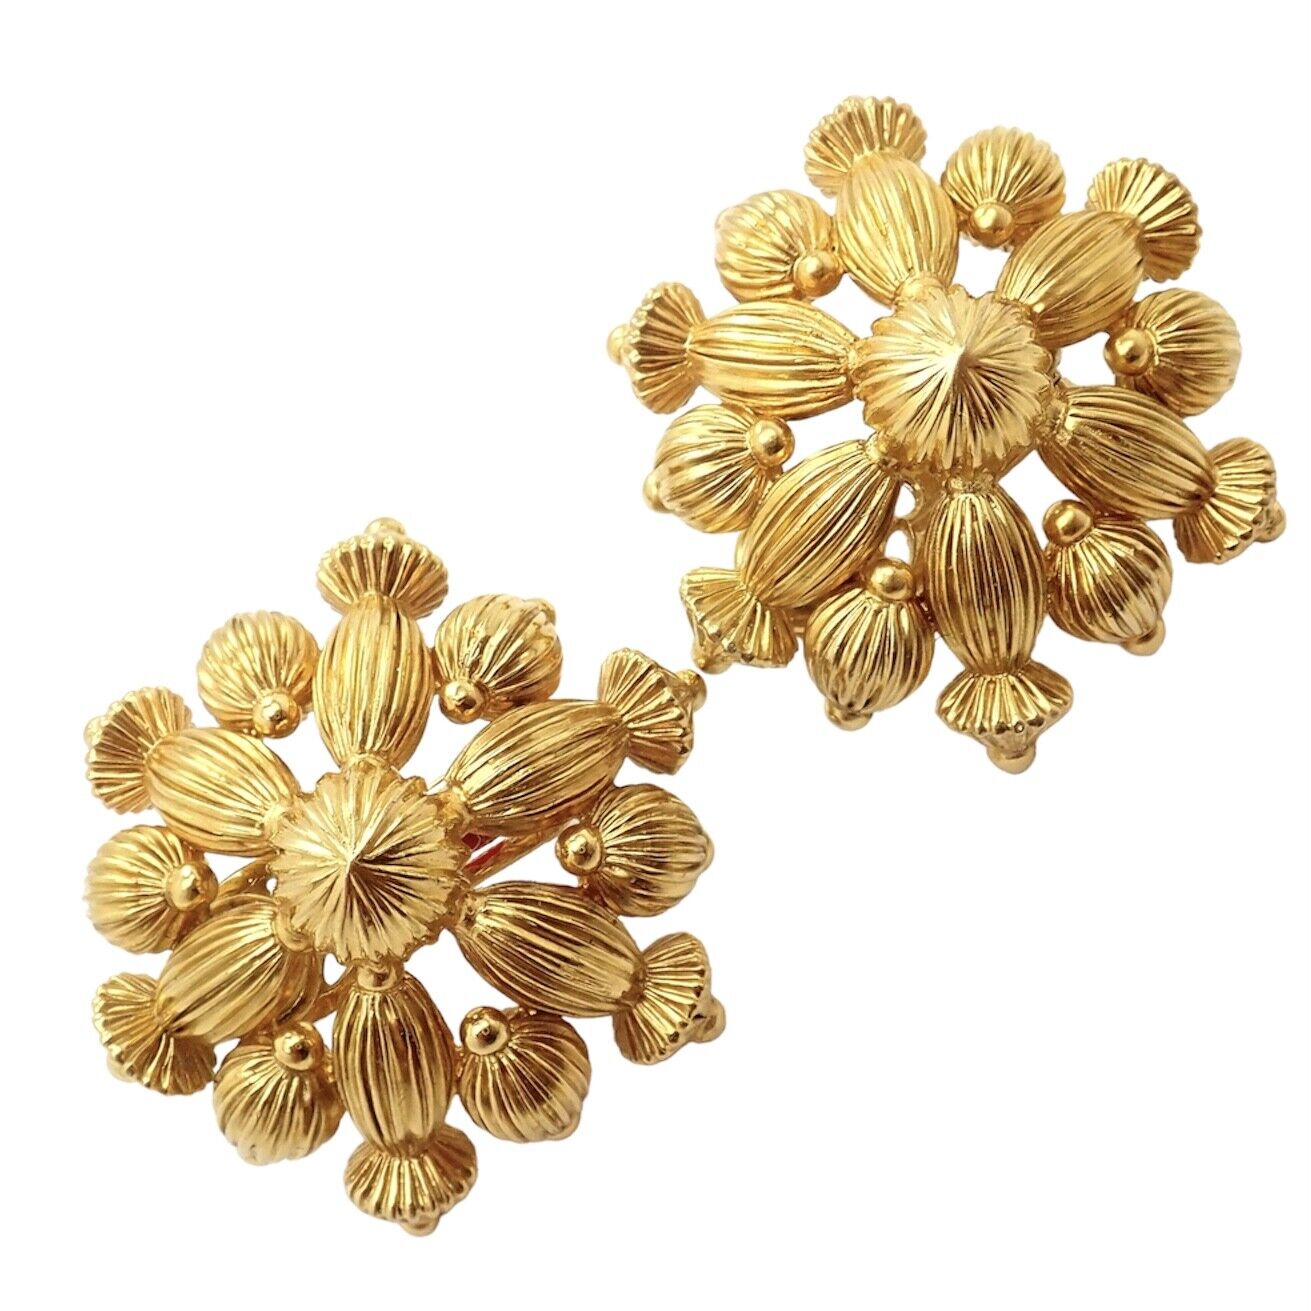 Lalaounis Jewelry & Watches:Vintage & Antique Jewelry:Earrings Vintage Estate Ilias Lalaounis 18k Yellow Gold Carved Bead Ball Earrings